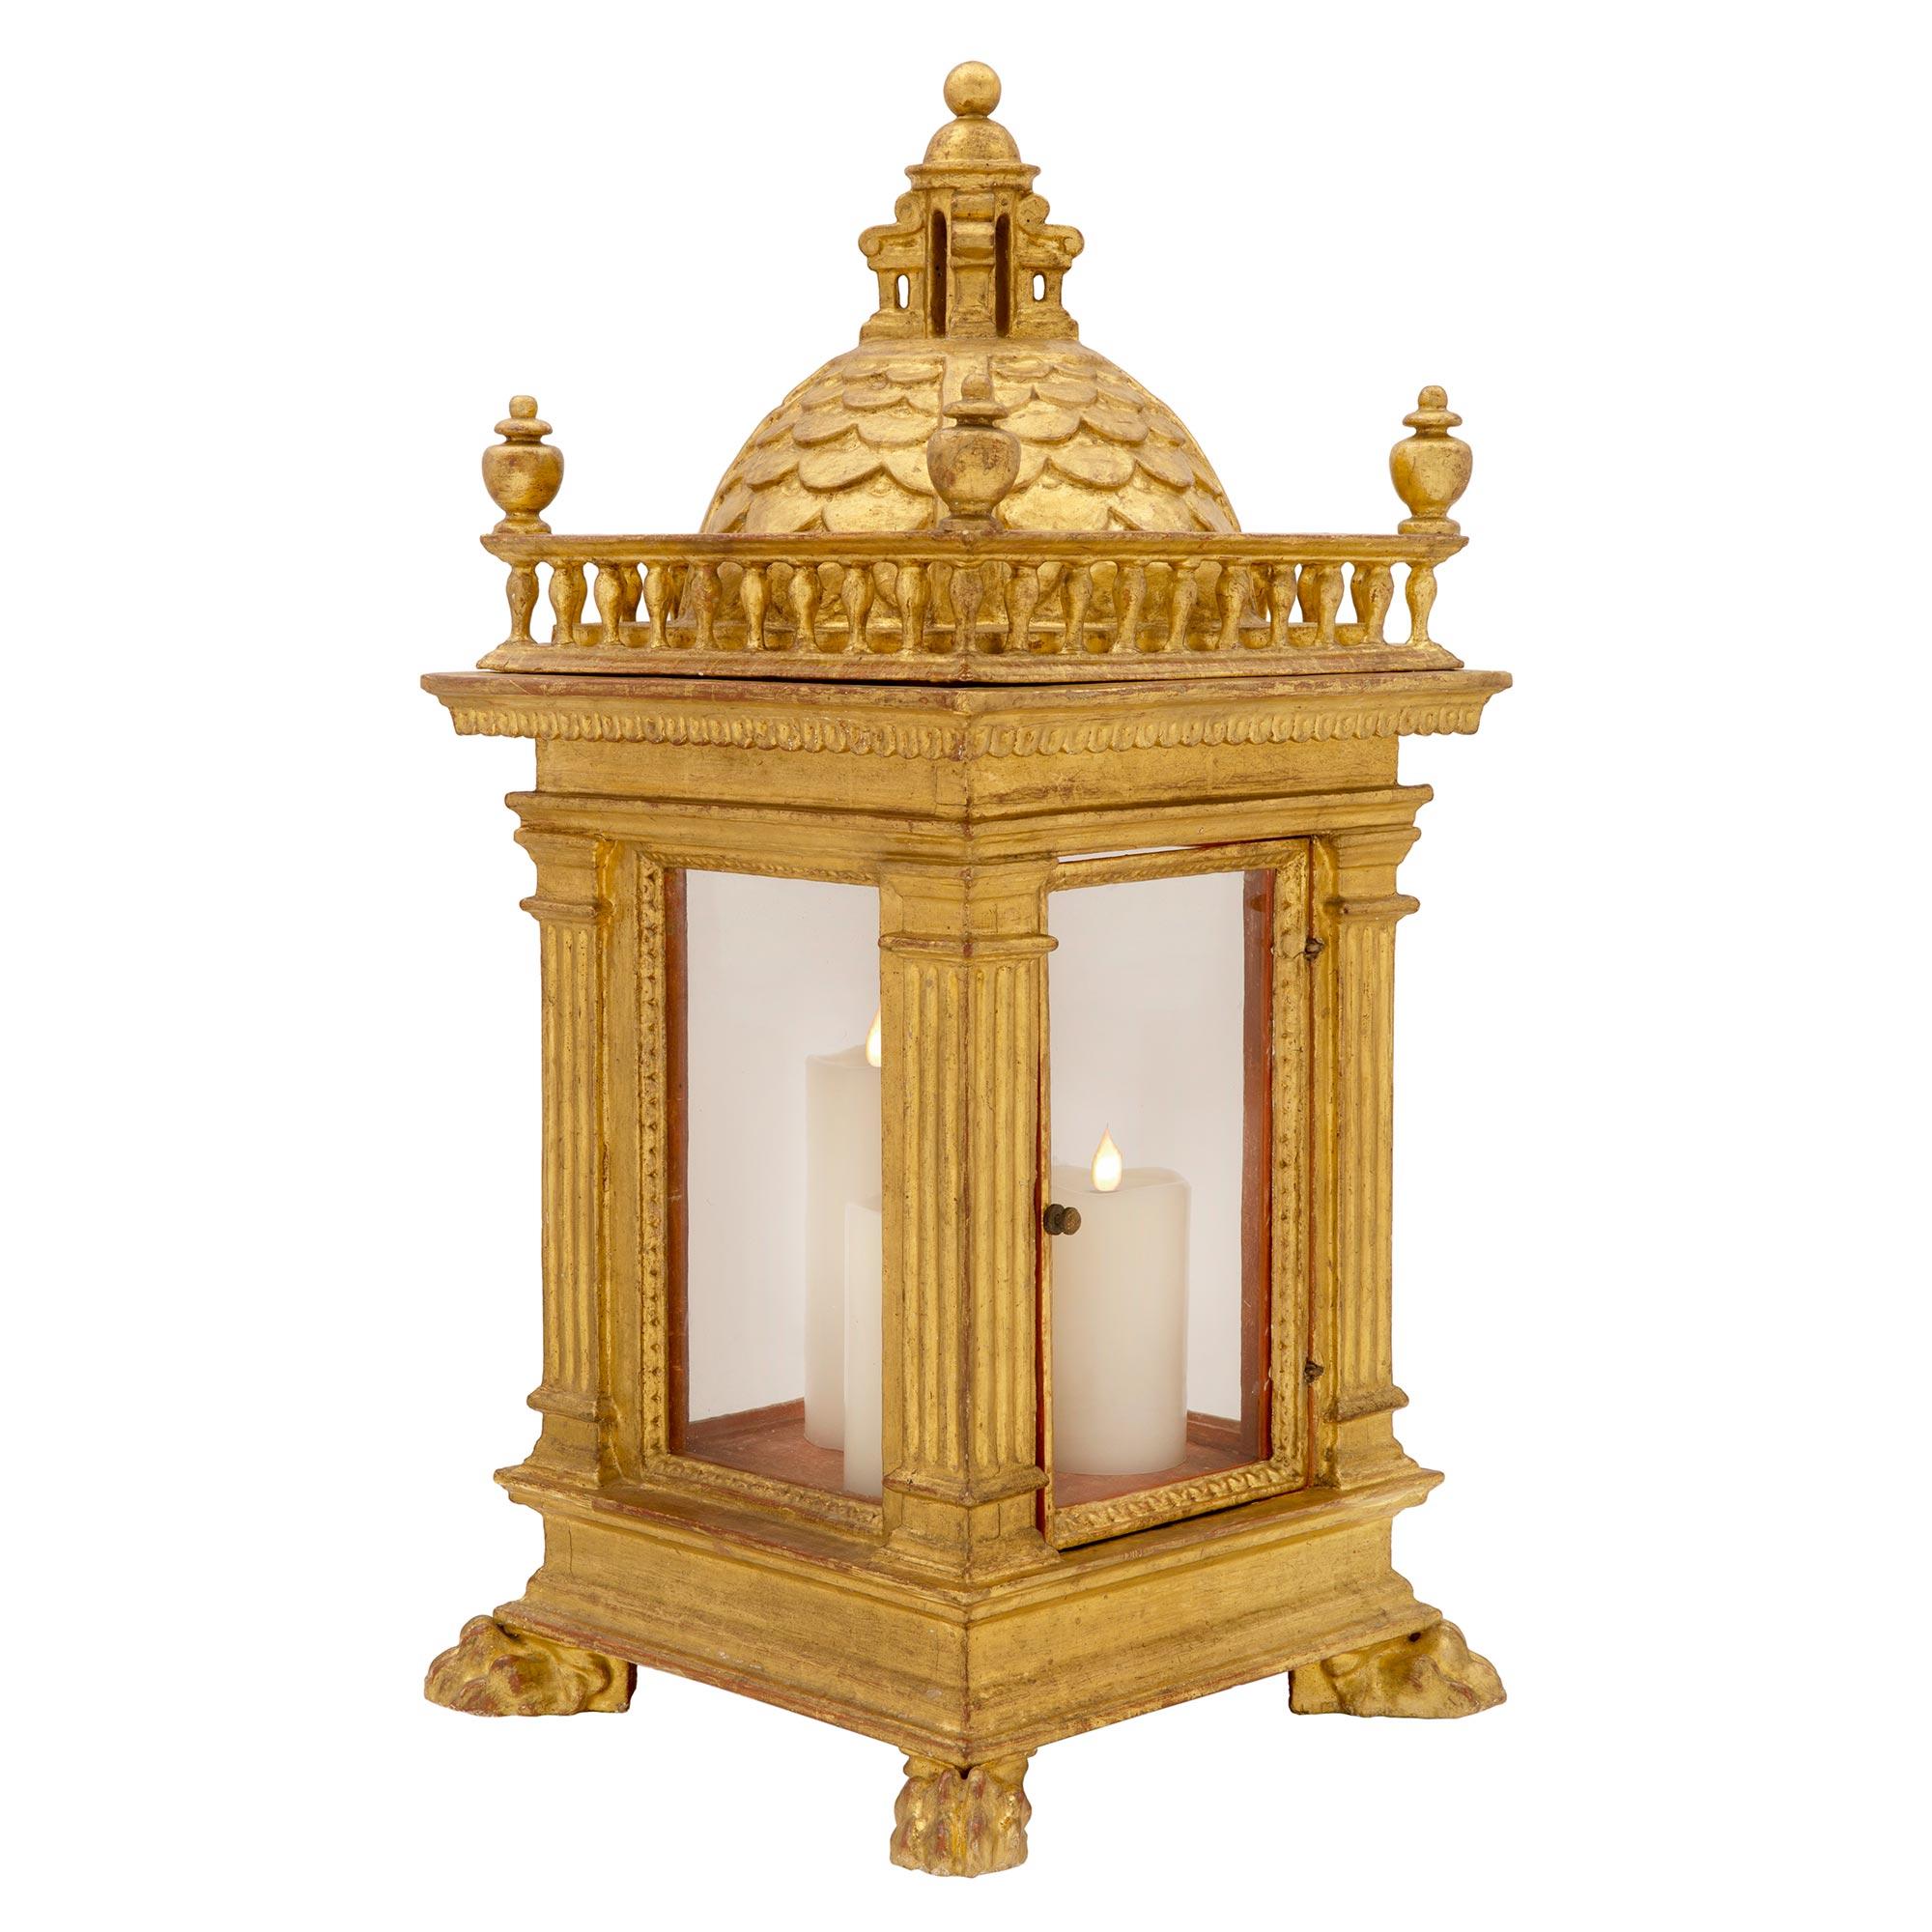 An exceptional and large scale pair of Italian 18th century Tuscan St. giltwood hurricane lanterns, circa 1750. Each lantern is raised by handsome richly carved paw feet below the square base with a decorative mottled design. Striking fluted